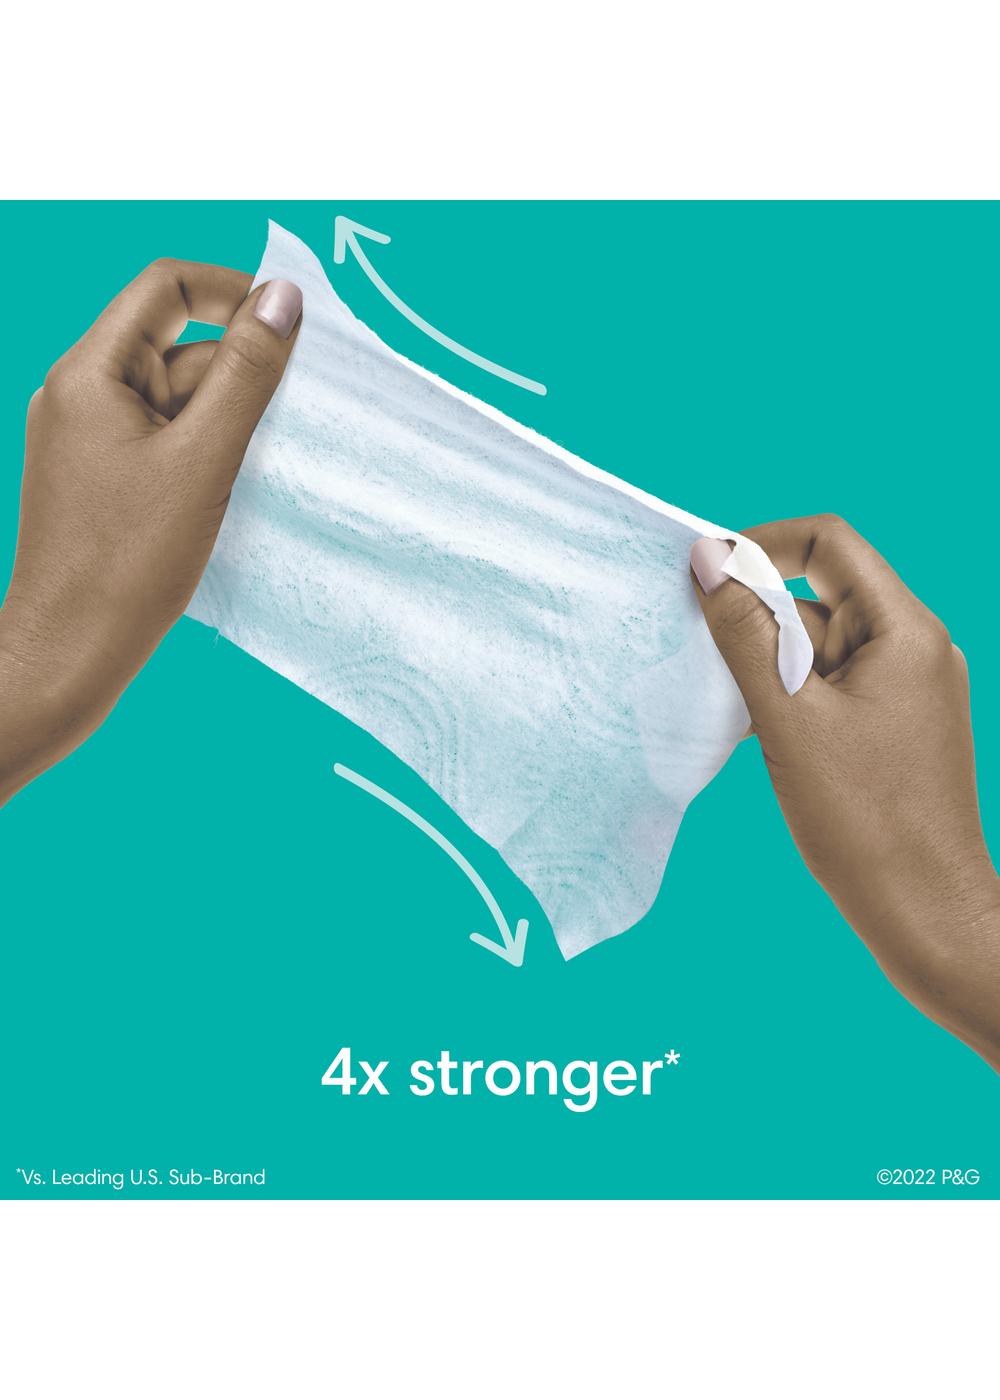 Pampers Baby Wipes - Fresh Scented 3 Pk; image 9 of 10